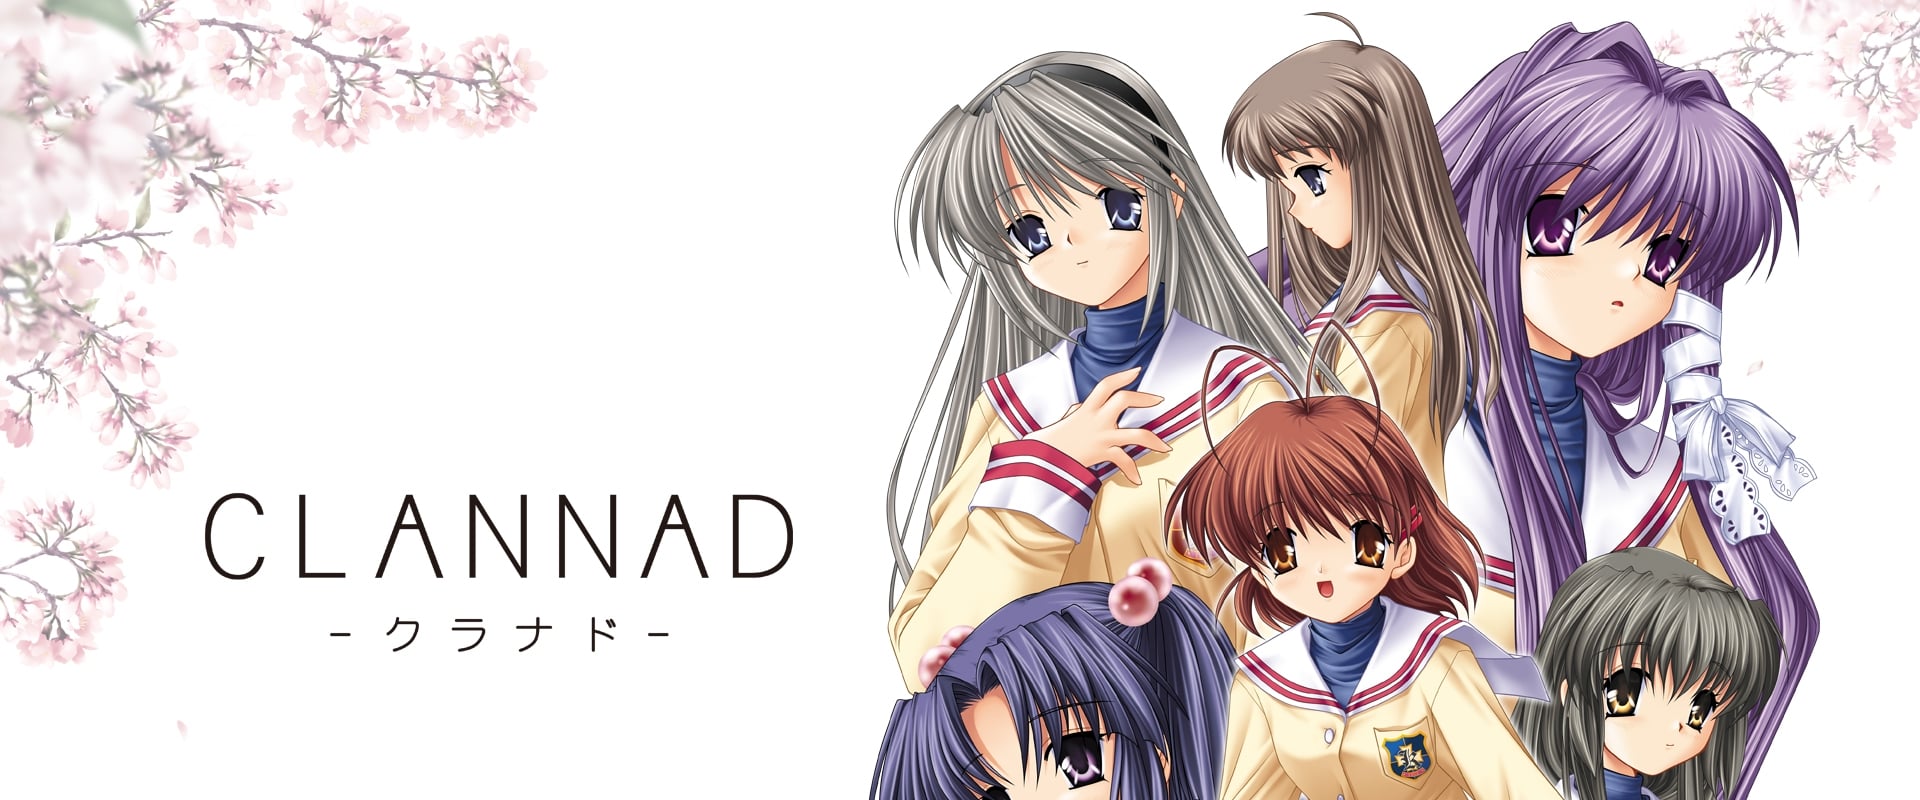 Clannad The Movie